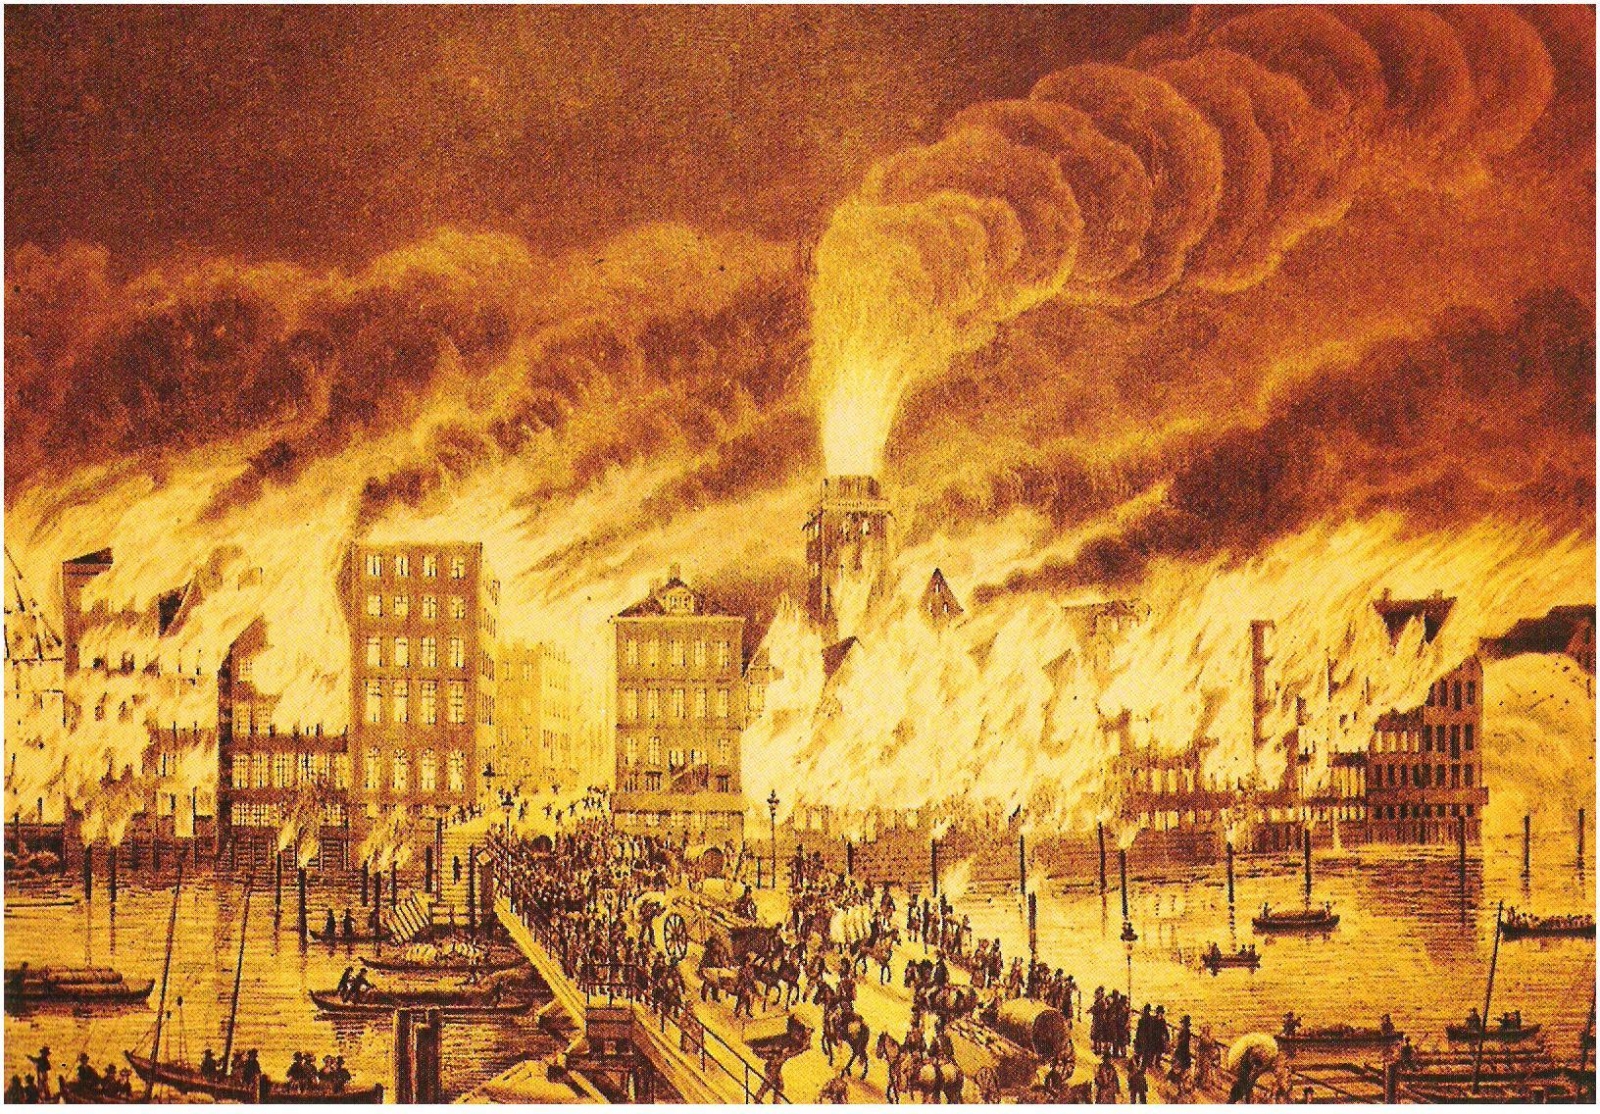 The Great Fire of 1842, painted by Peter Suhr in 1842